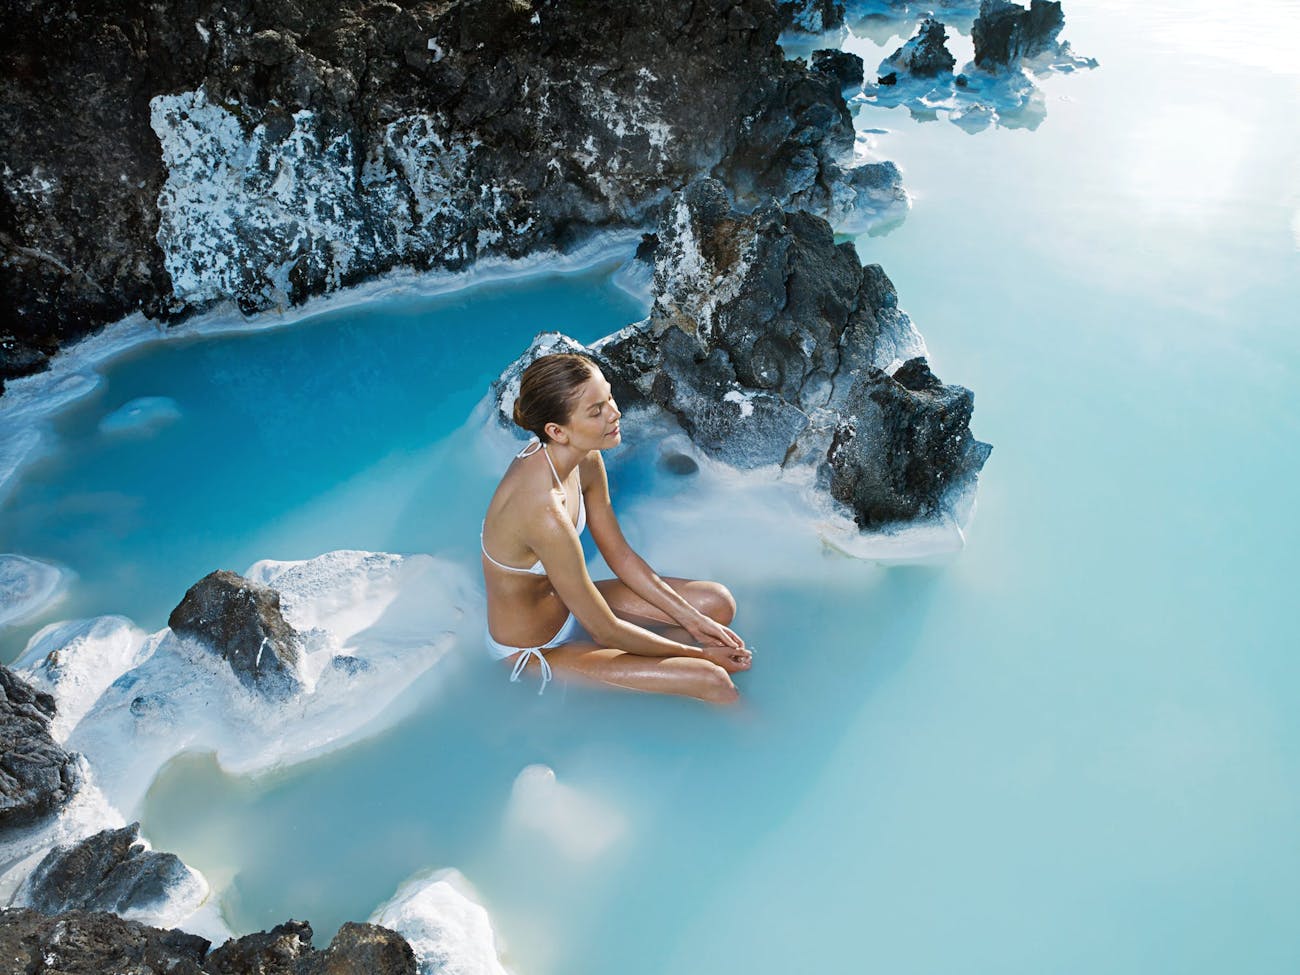 Tiny Nudist Naturist - When You Have to Get Naked in Iceland | Guide to Iceland